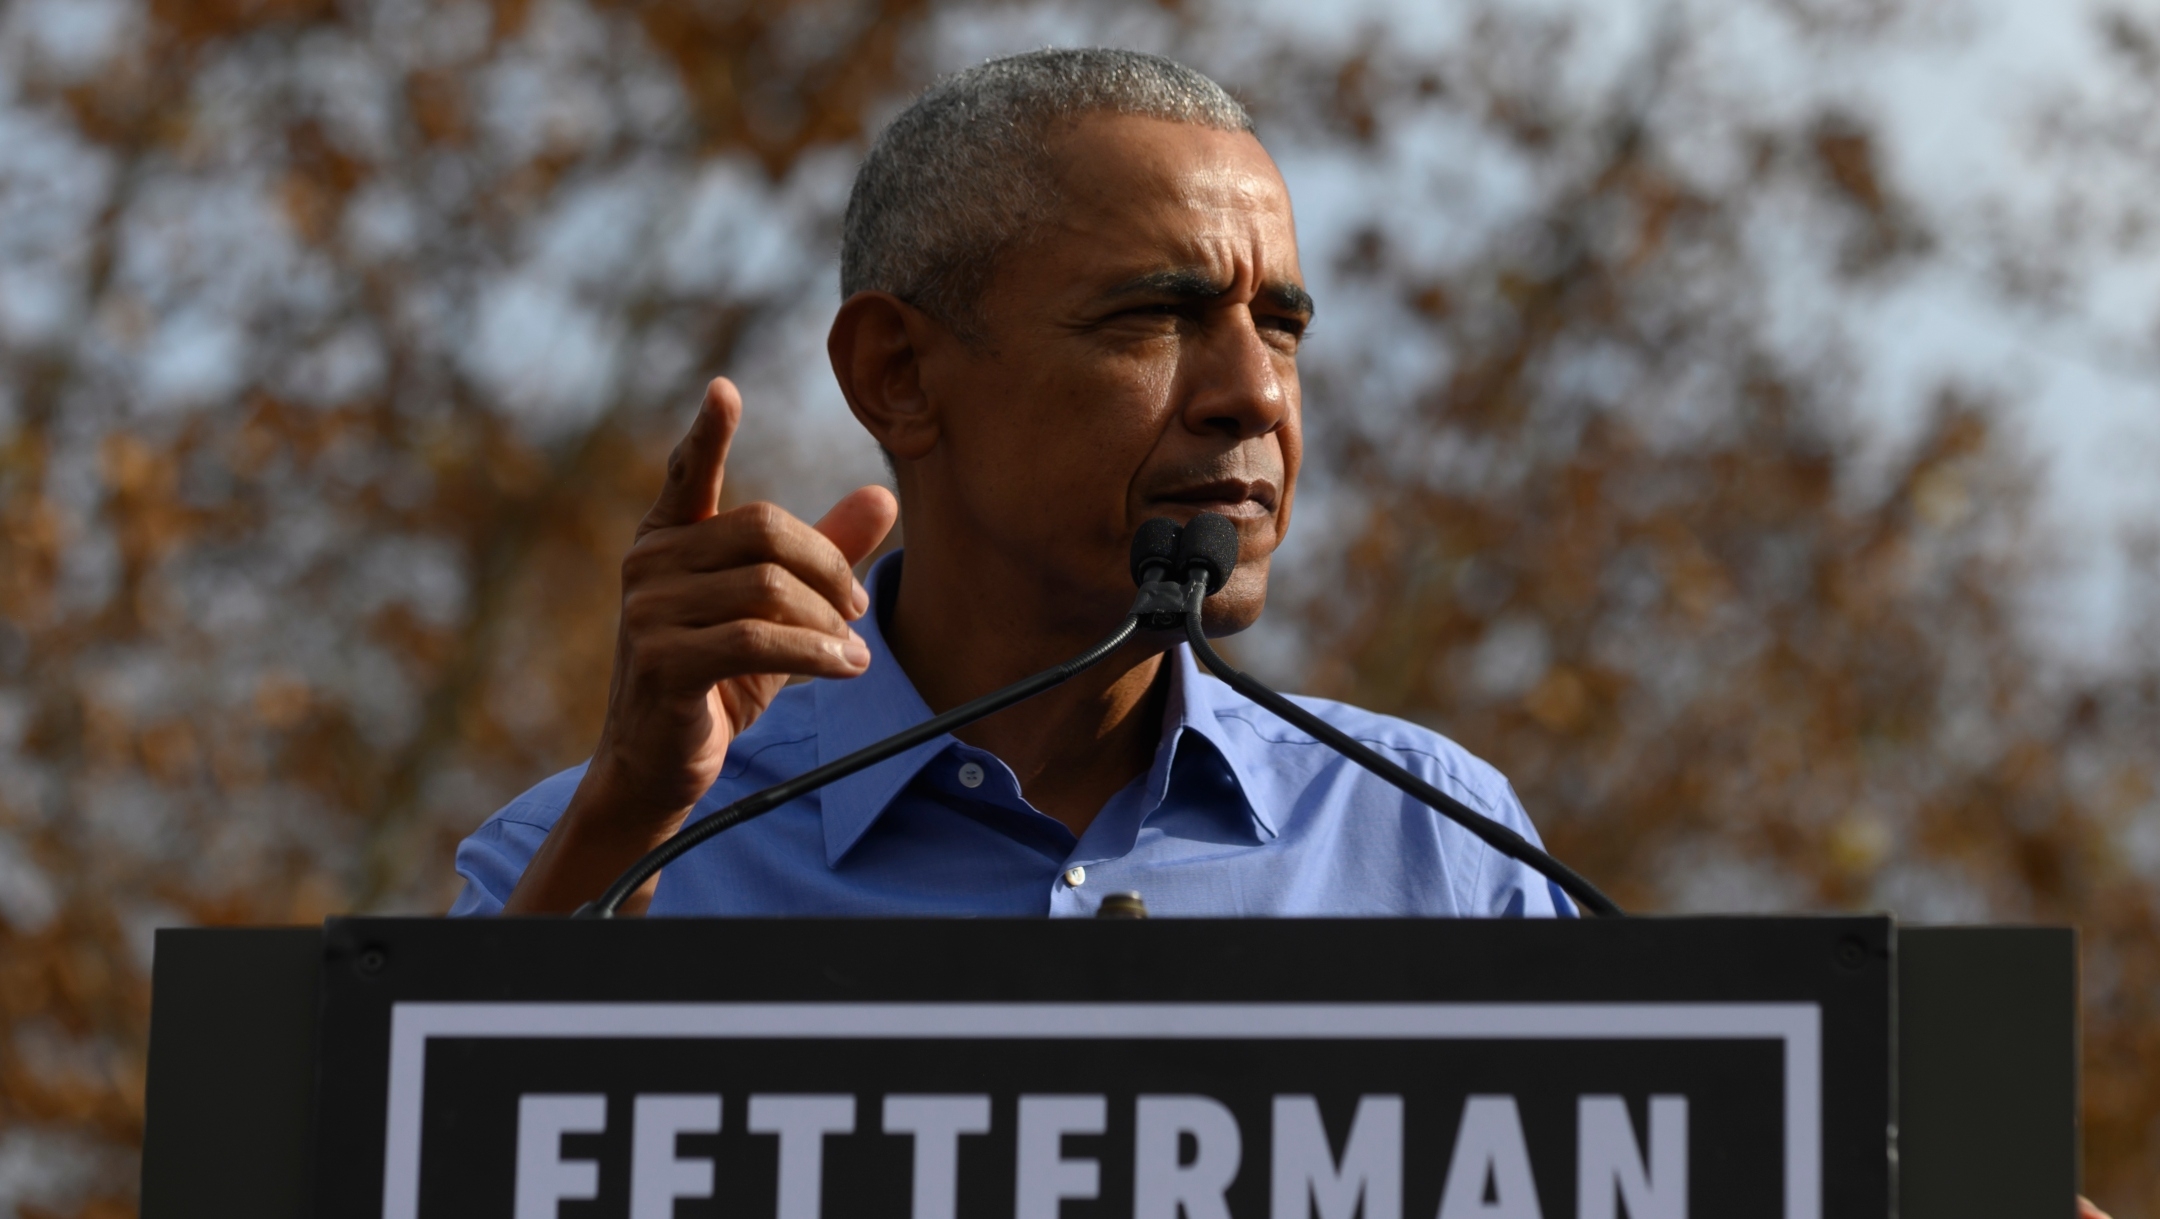 Former U.S. President Barack Obama speaks to supporters of Pennsylvania Democratic candidate for Senate John Fetterman at Schenley Plaza, on the campus of the University of Pittsburgh, Nov. 5, 2022. (Jeff Swensen/Getty Images)